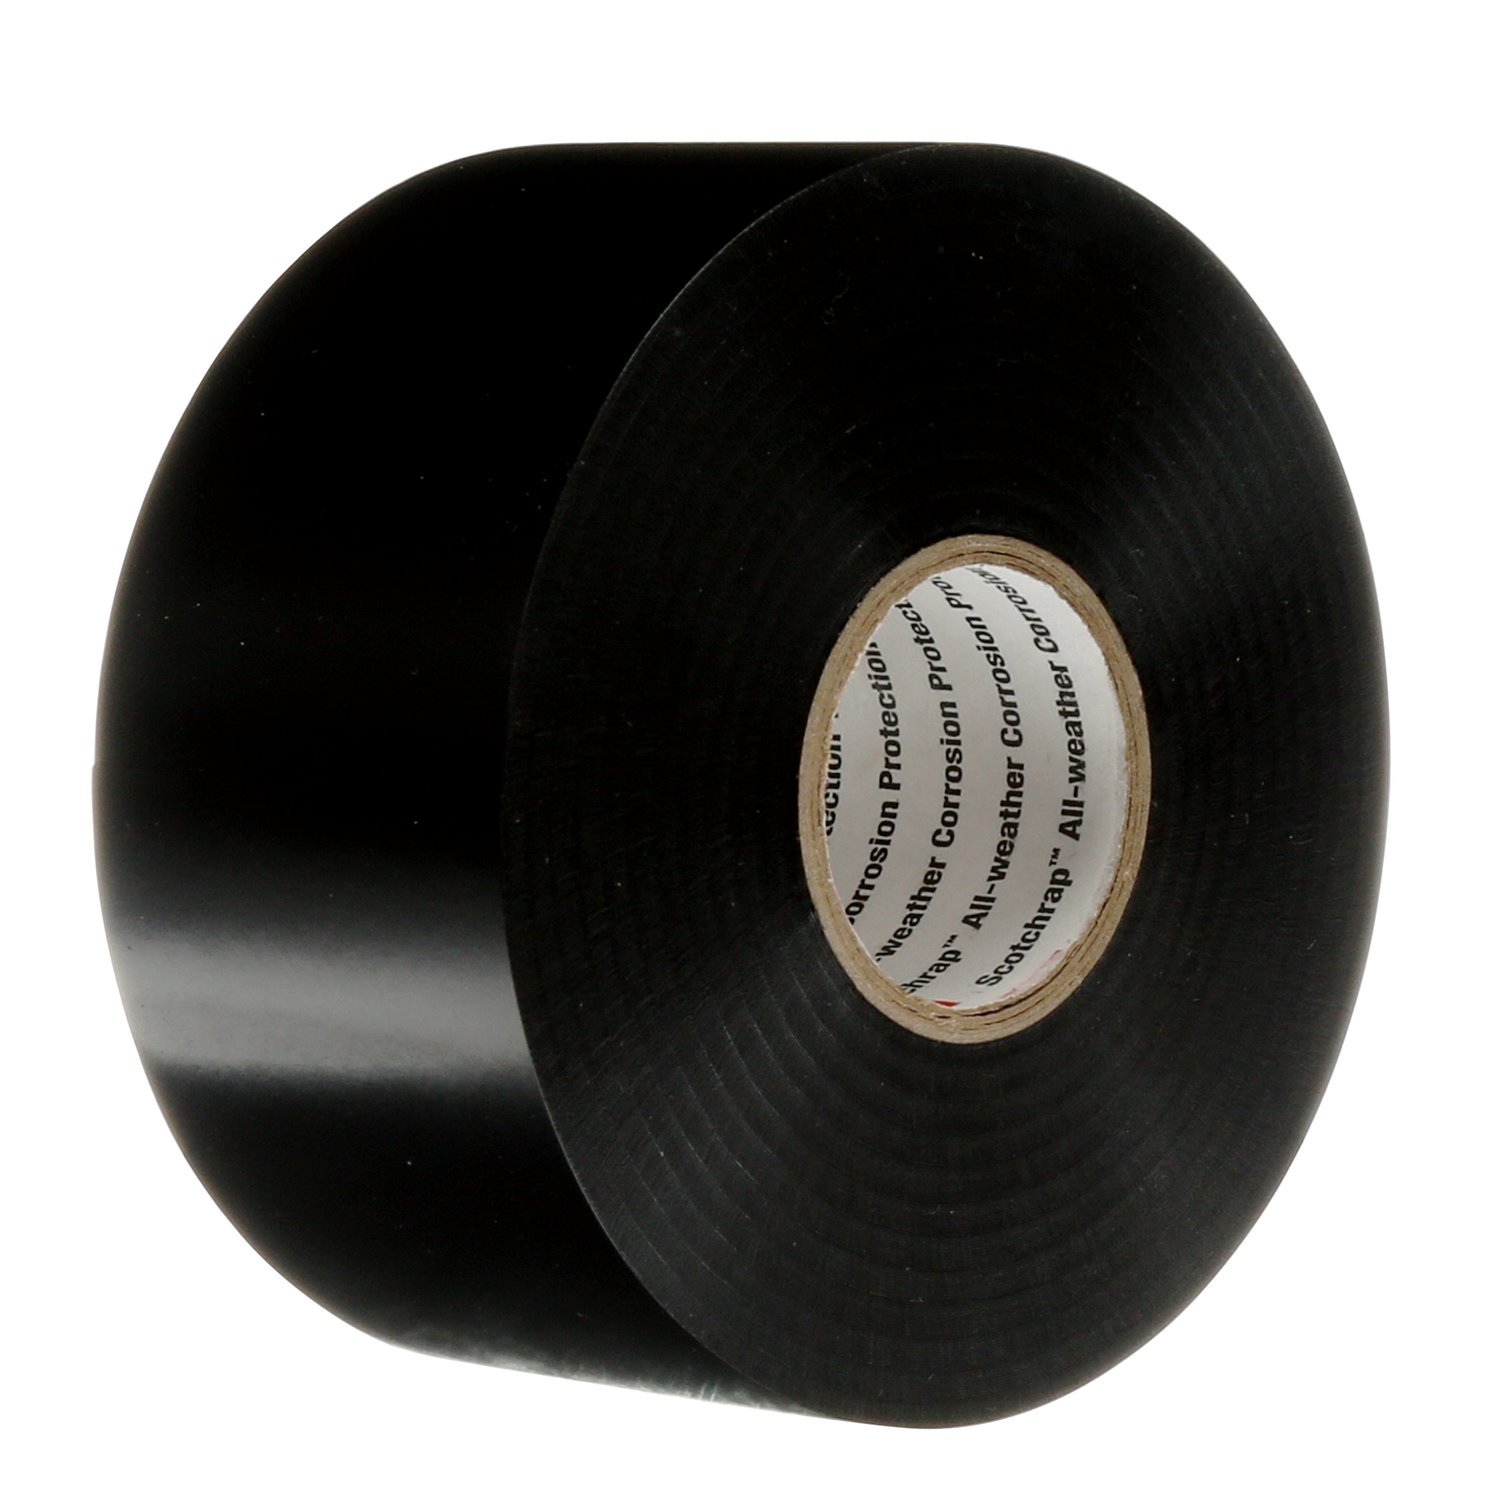 Scotch 99-G Pop-Up Tape Refills for sale online